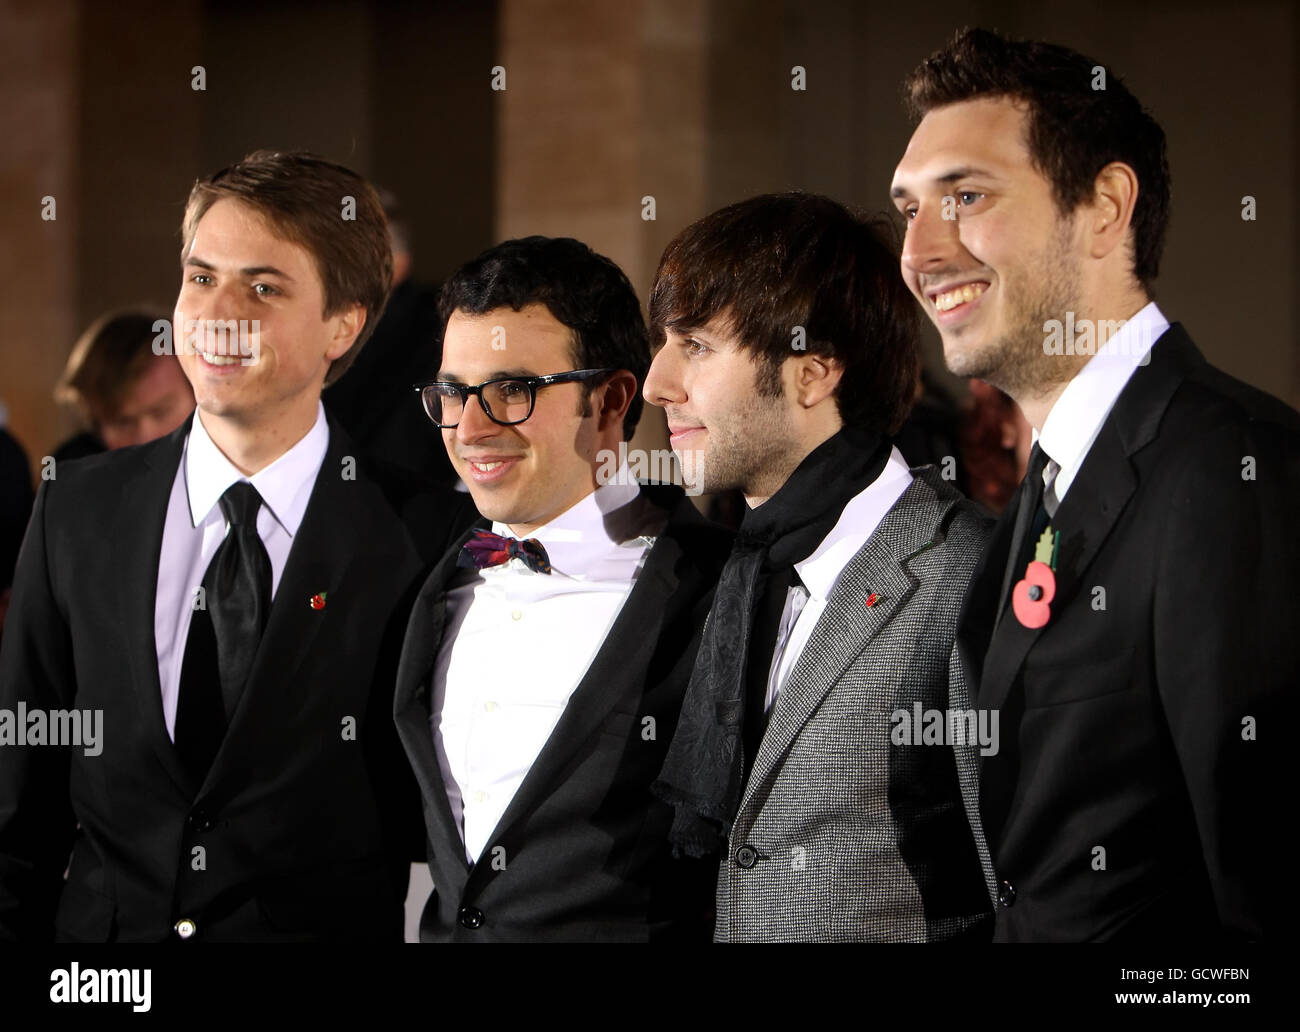 Stars of The Inbetweeners (left to right) Joe Thomas, Simon Bird, James Buckley and Blake Harrison arrive at the Variety Club Showbiz Awards 2010, at the Grosvenor Hotel, in Mayfair, central London. Stock Photo